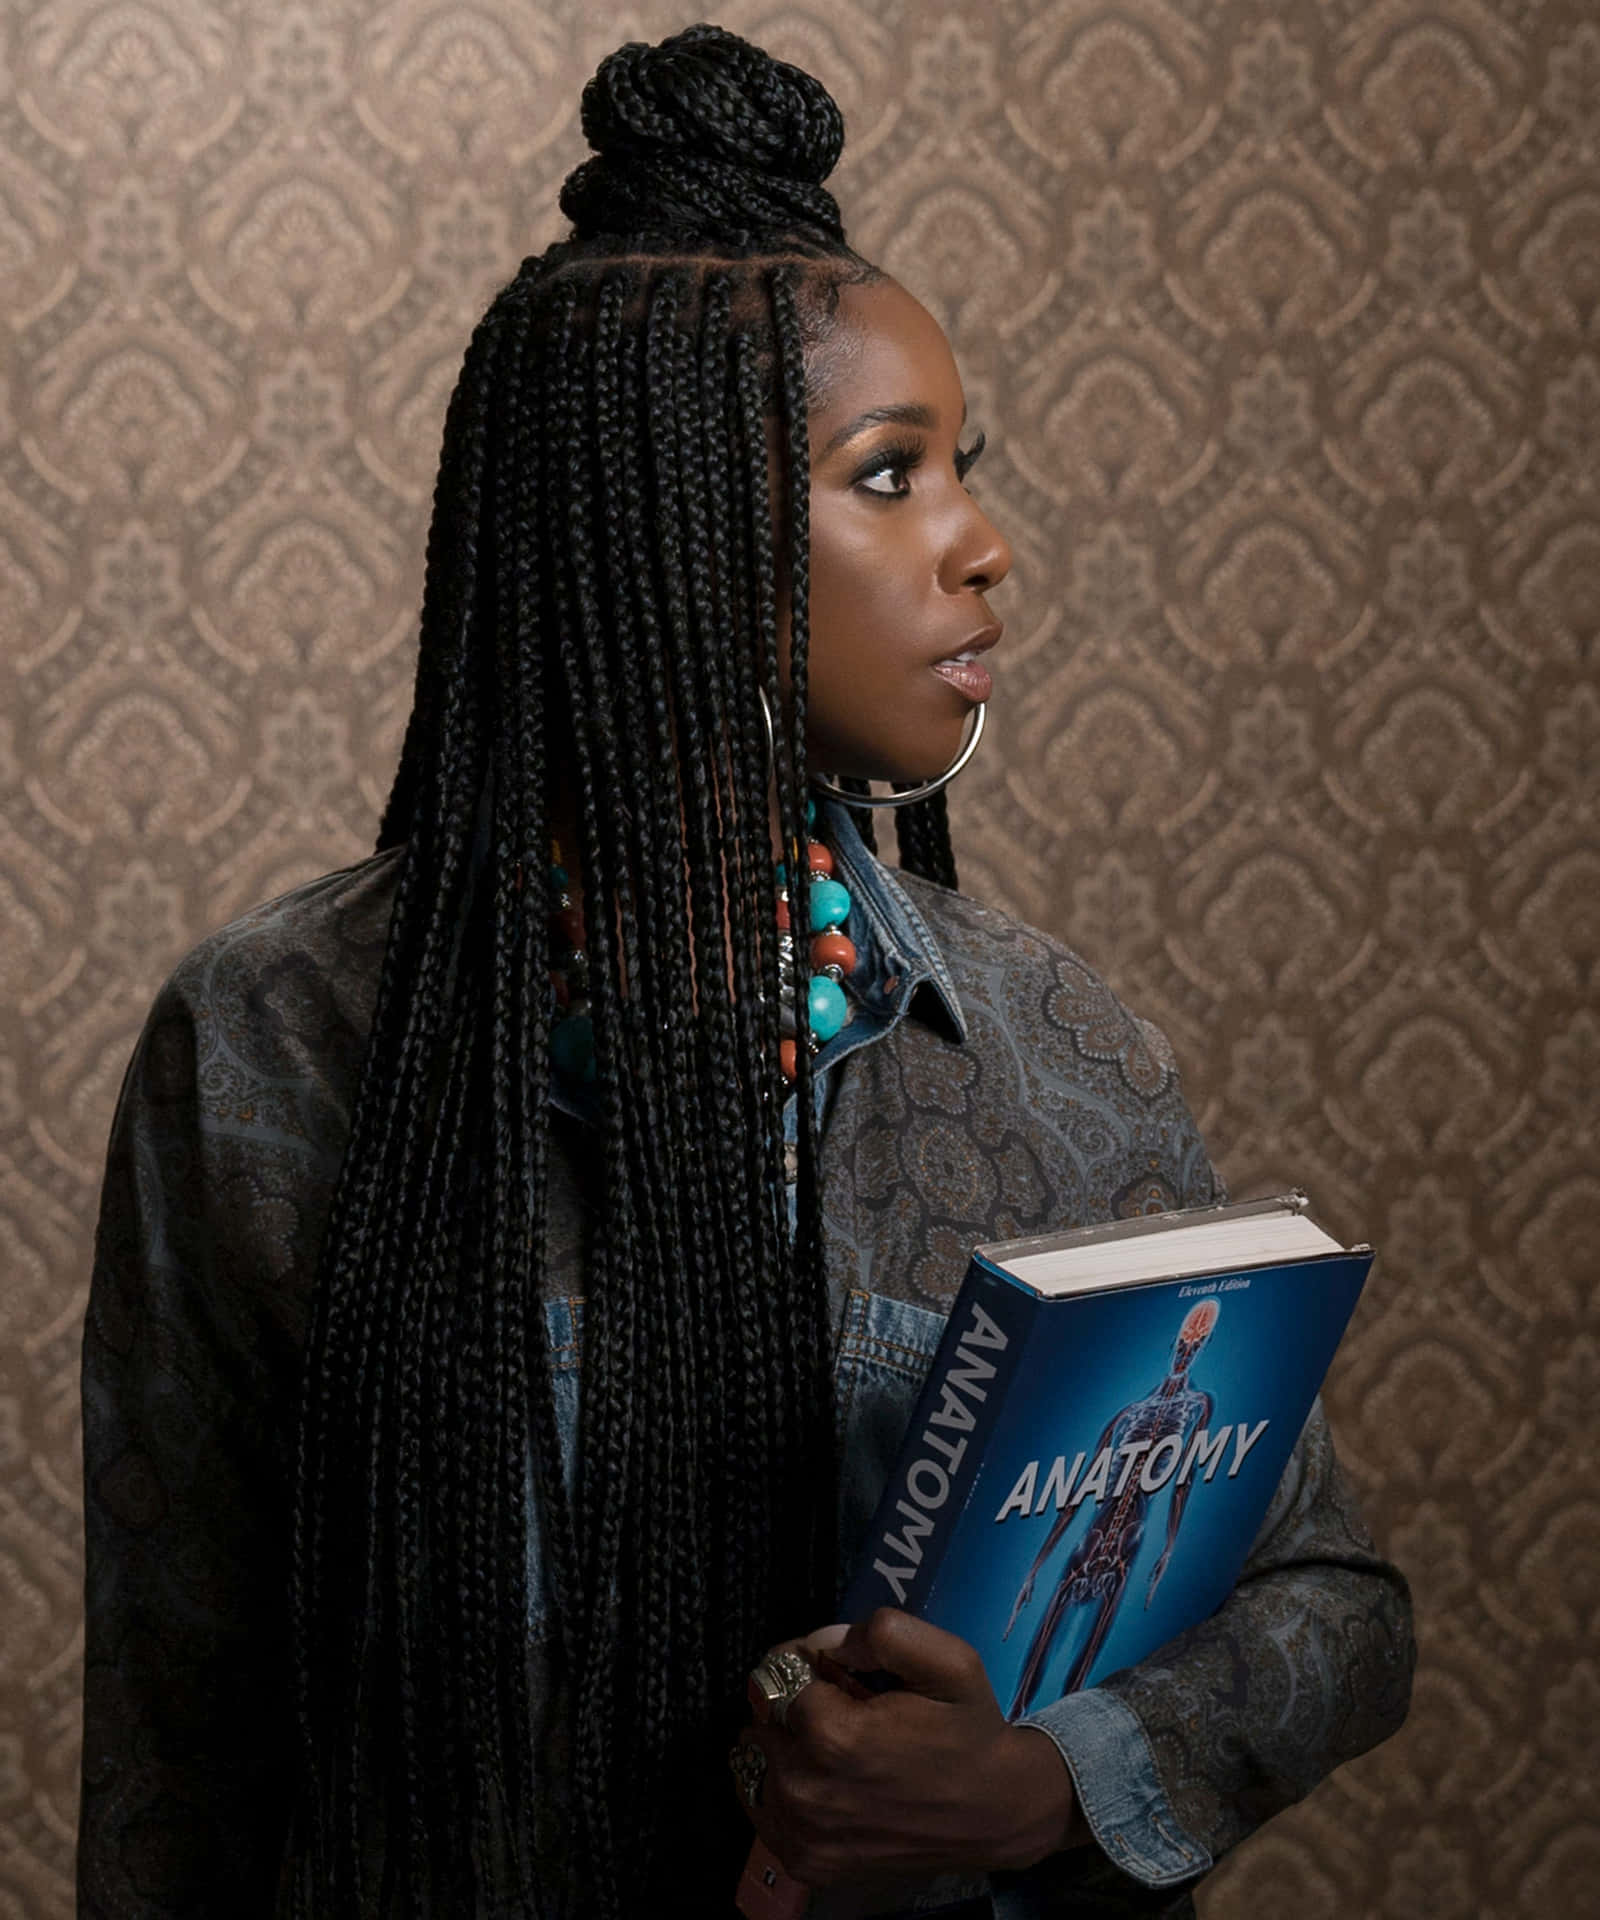 A Woman With Braids Holding A Book